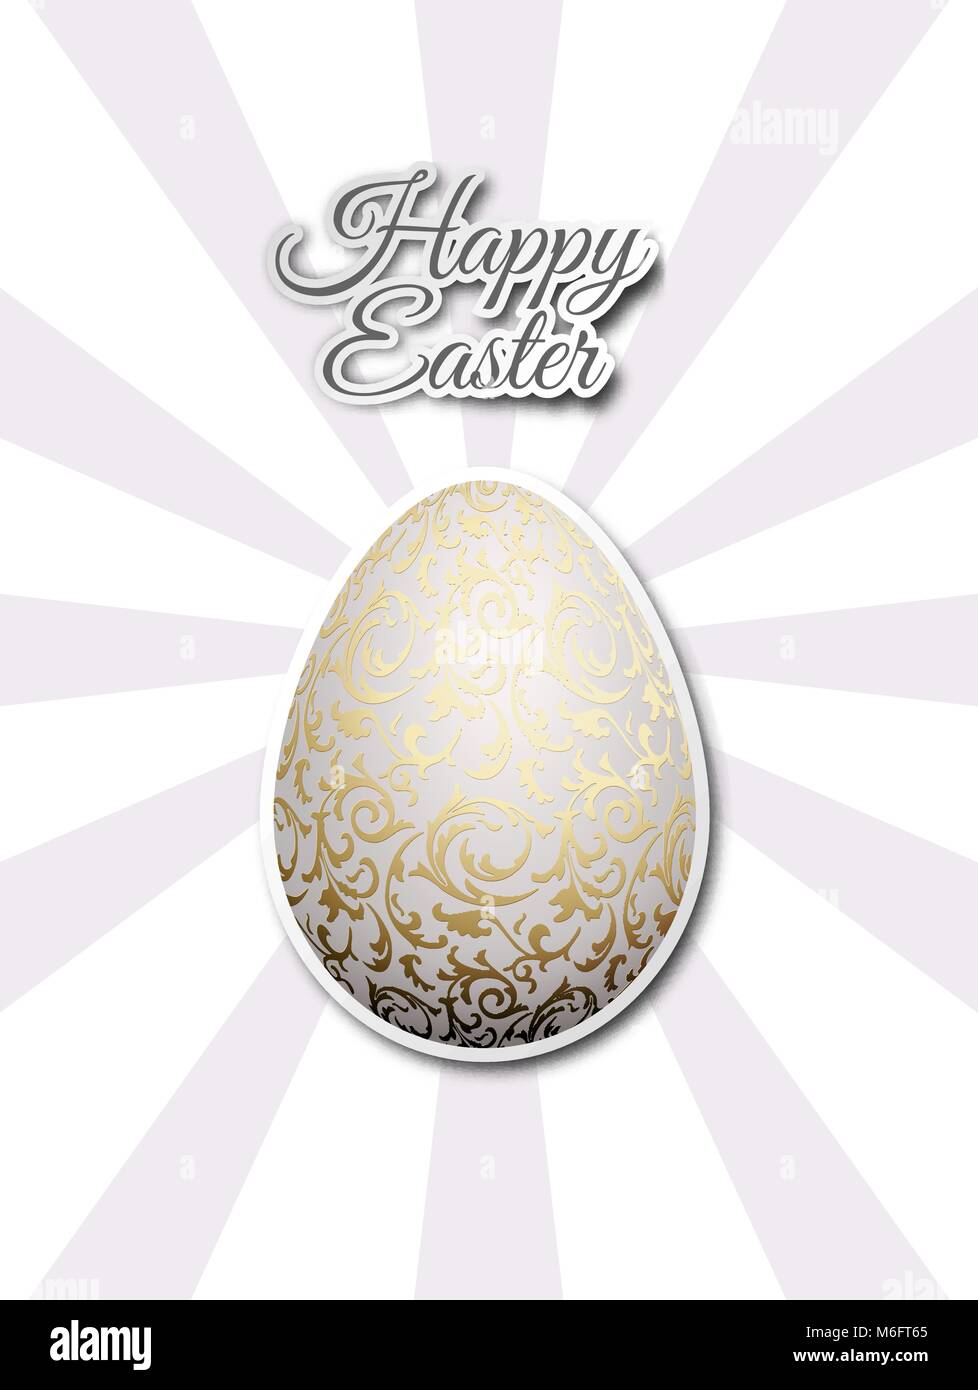 White egg with golden metallic floral pattern. Flat sticker on gray sun beams background. Bright greeting card with Happy Easter text Stock Vector